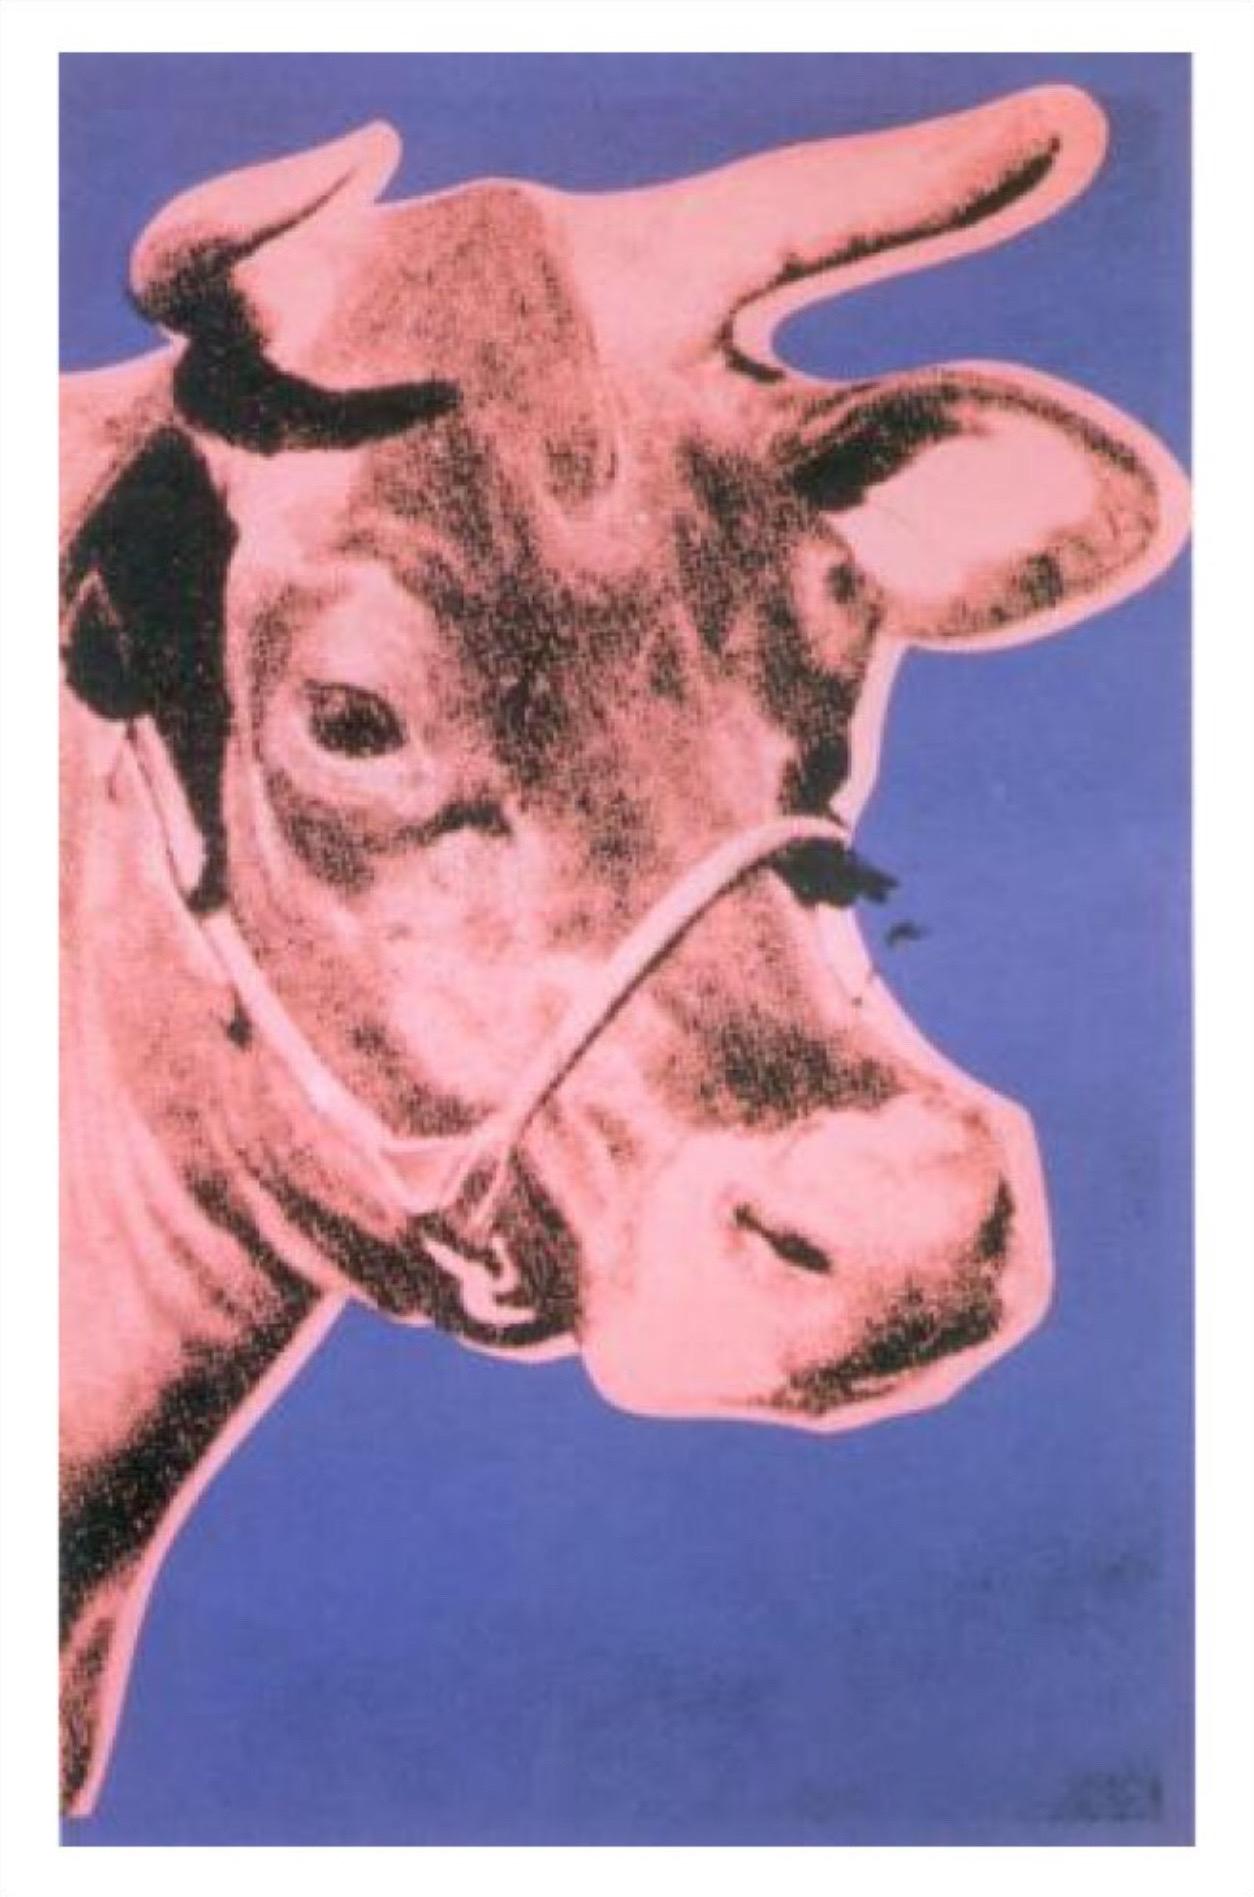 Andy Warhol, Cow, 1976 ( pink & purple)

Matt 250gsm conservation digital paper

Image size: 91 x 142 cm (35.82 x 55.90 in)
Paper size: 100 x 150 cm (39.37 x 59.05 in) 

In a 1966 exhibition at the Leo Castelli gallery in New York City, Warhol